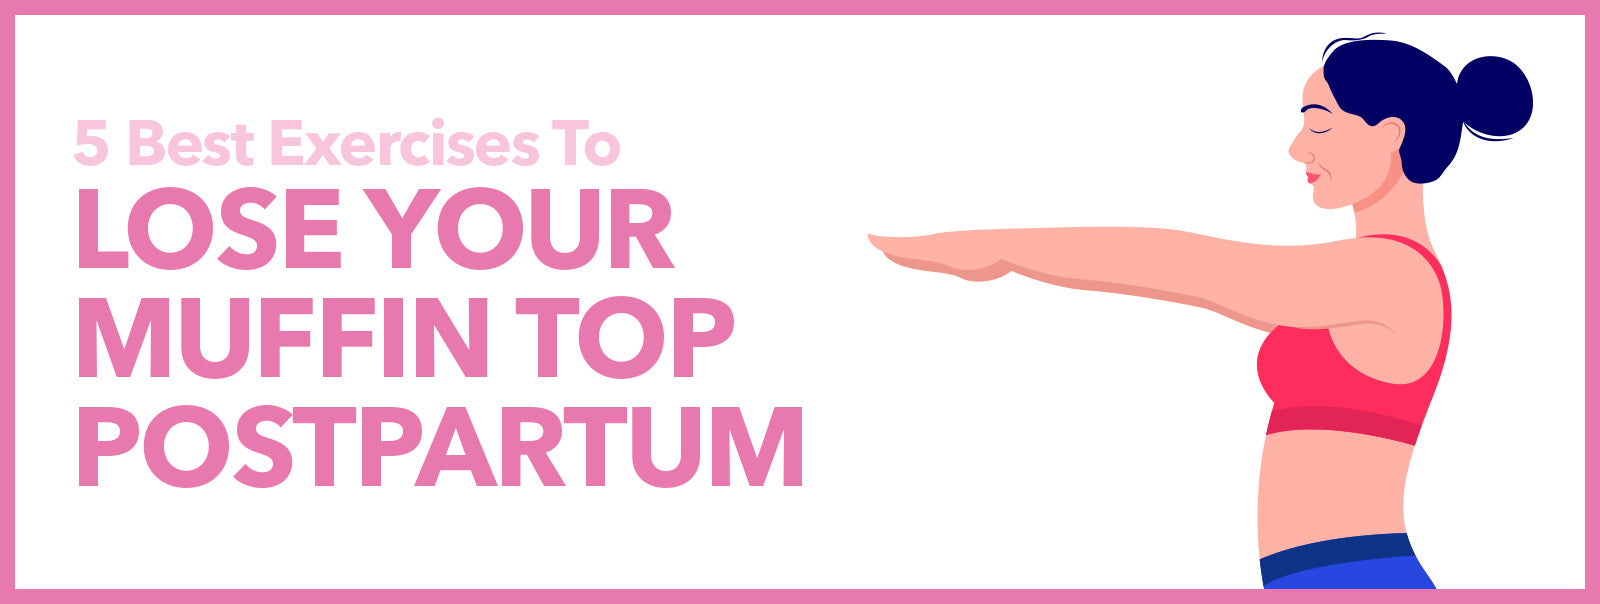 5 Best Exercises to Lose Your Muffin Top Postpartum Blog Banner